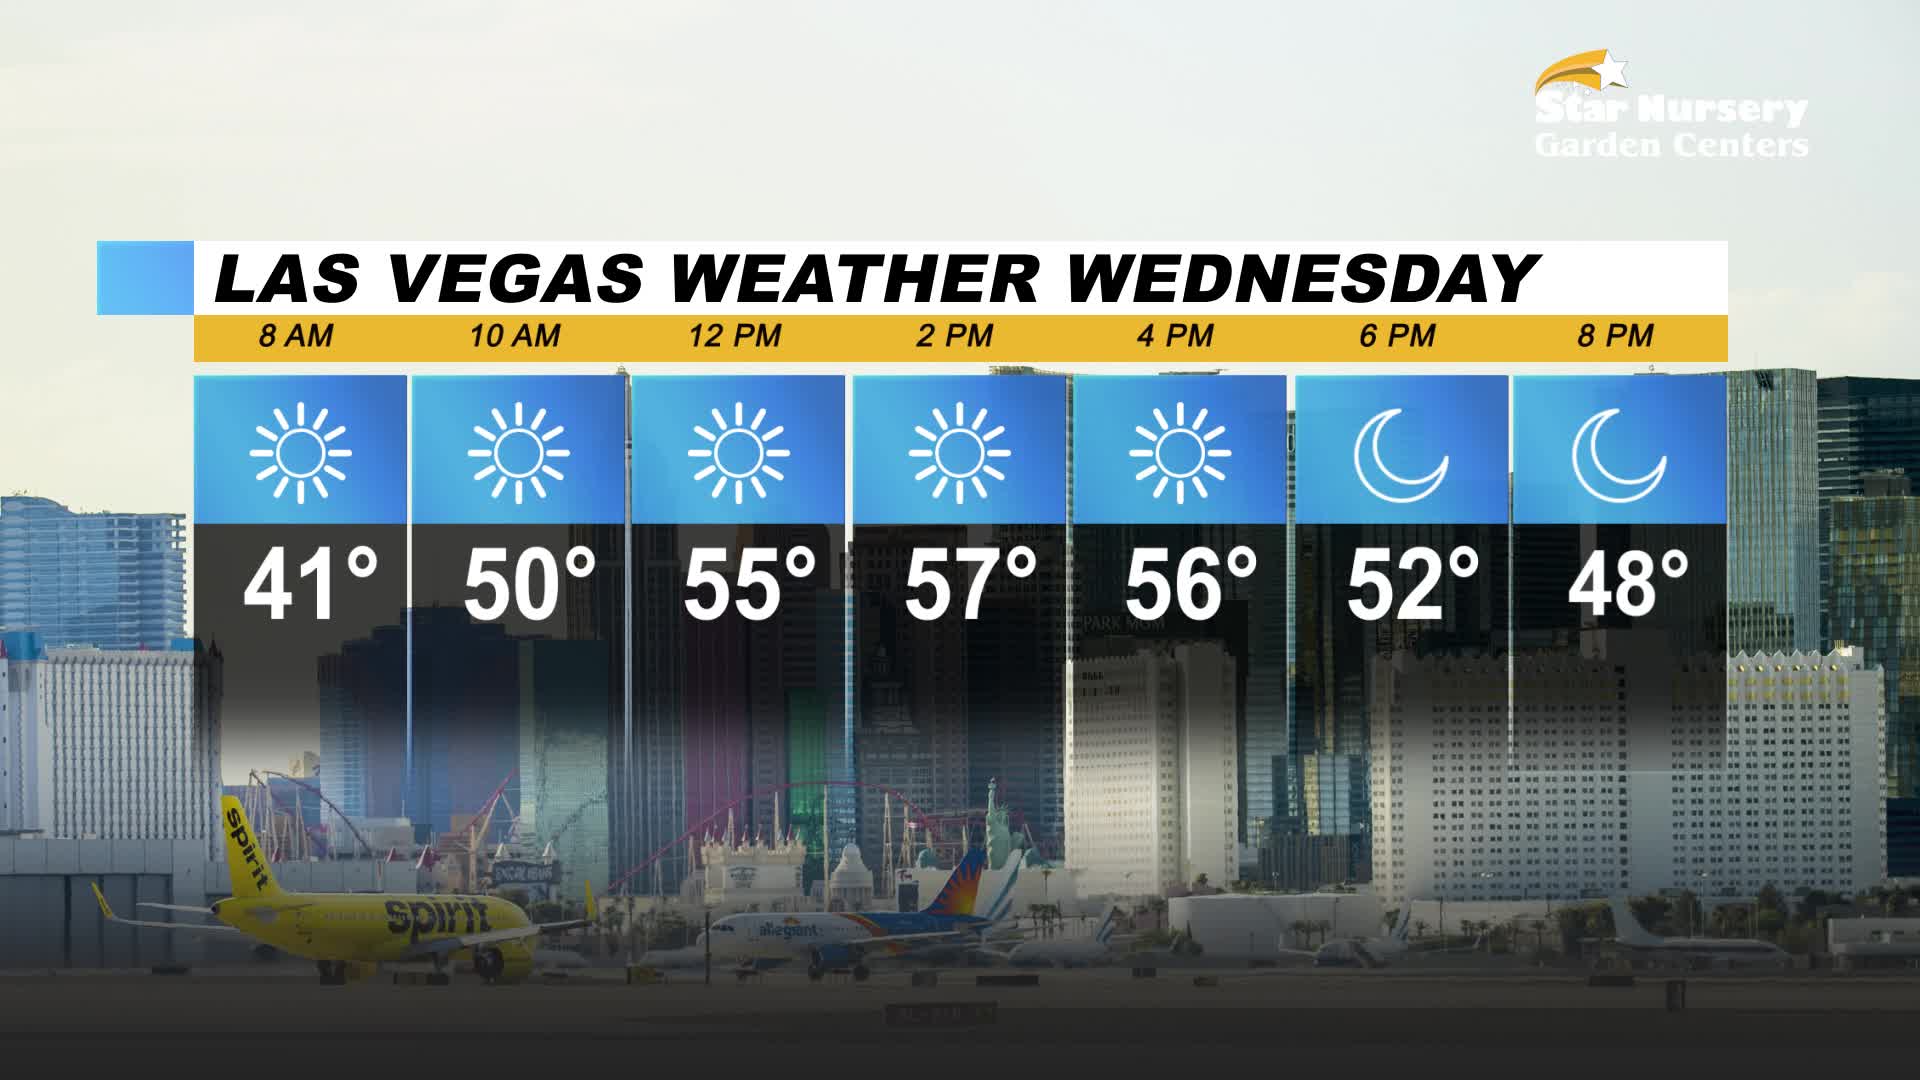 Sunny skies for Wednesday